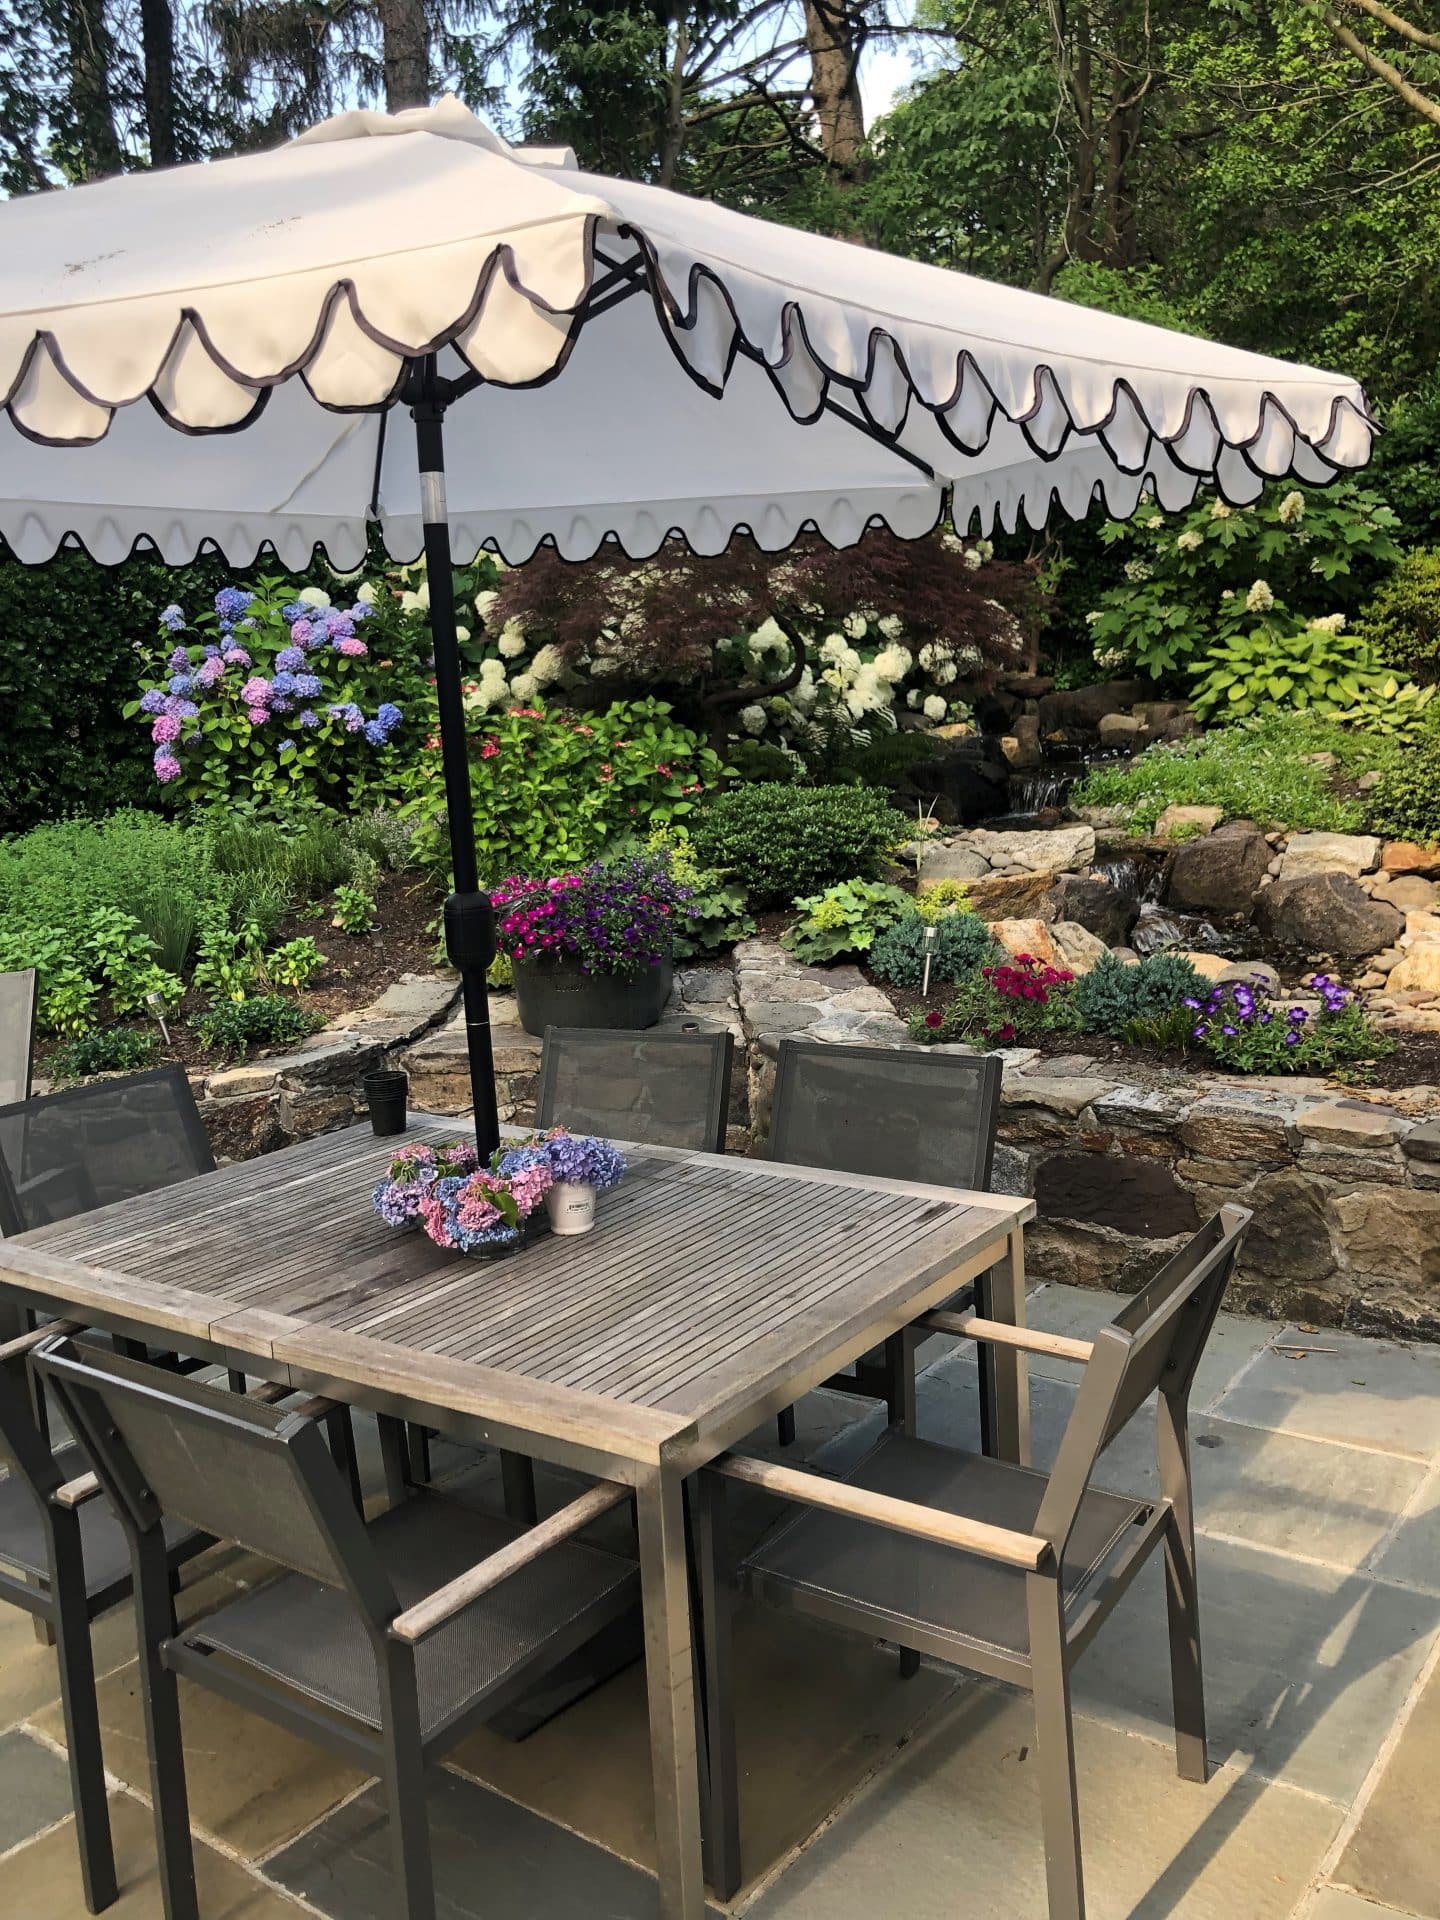 This Larchmont backyard has a serene feeling with a pond and lush plantings surrounding this bluestone patio